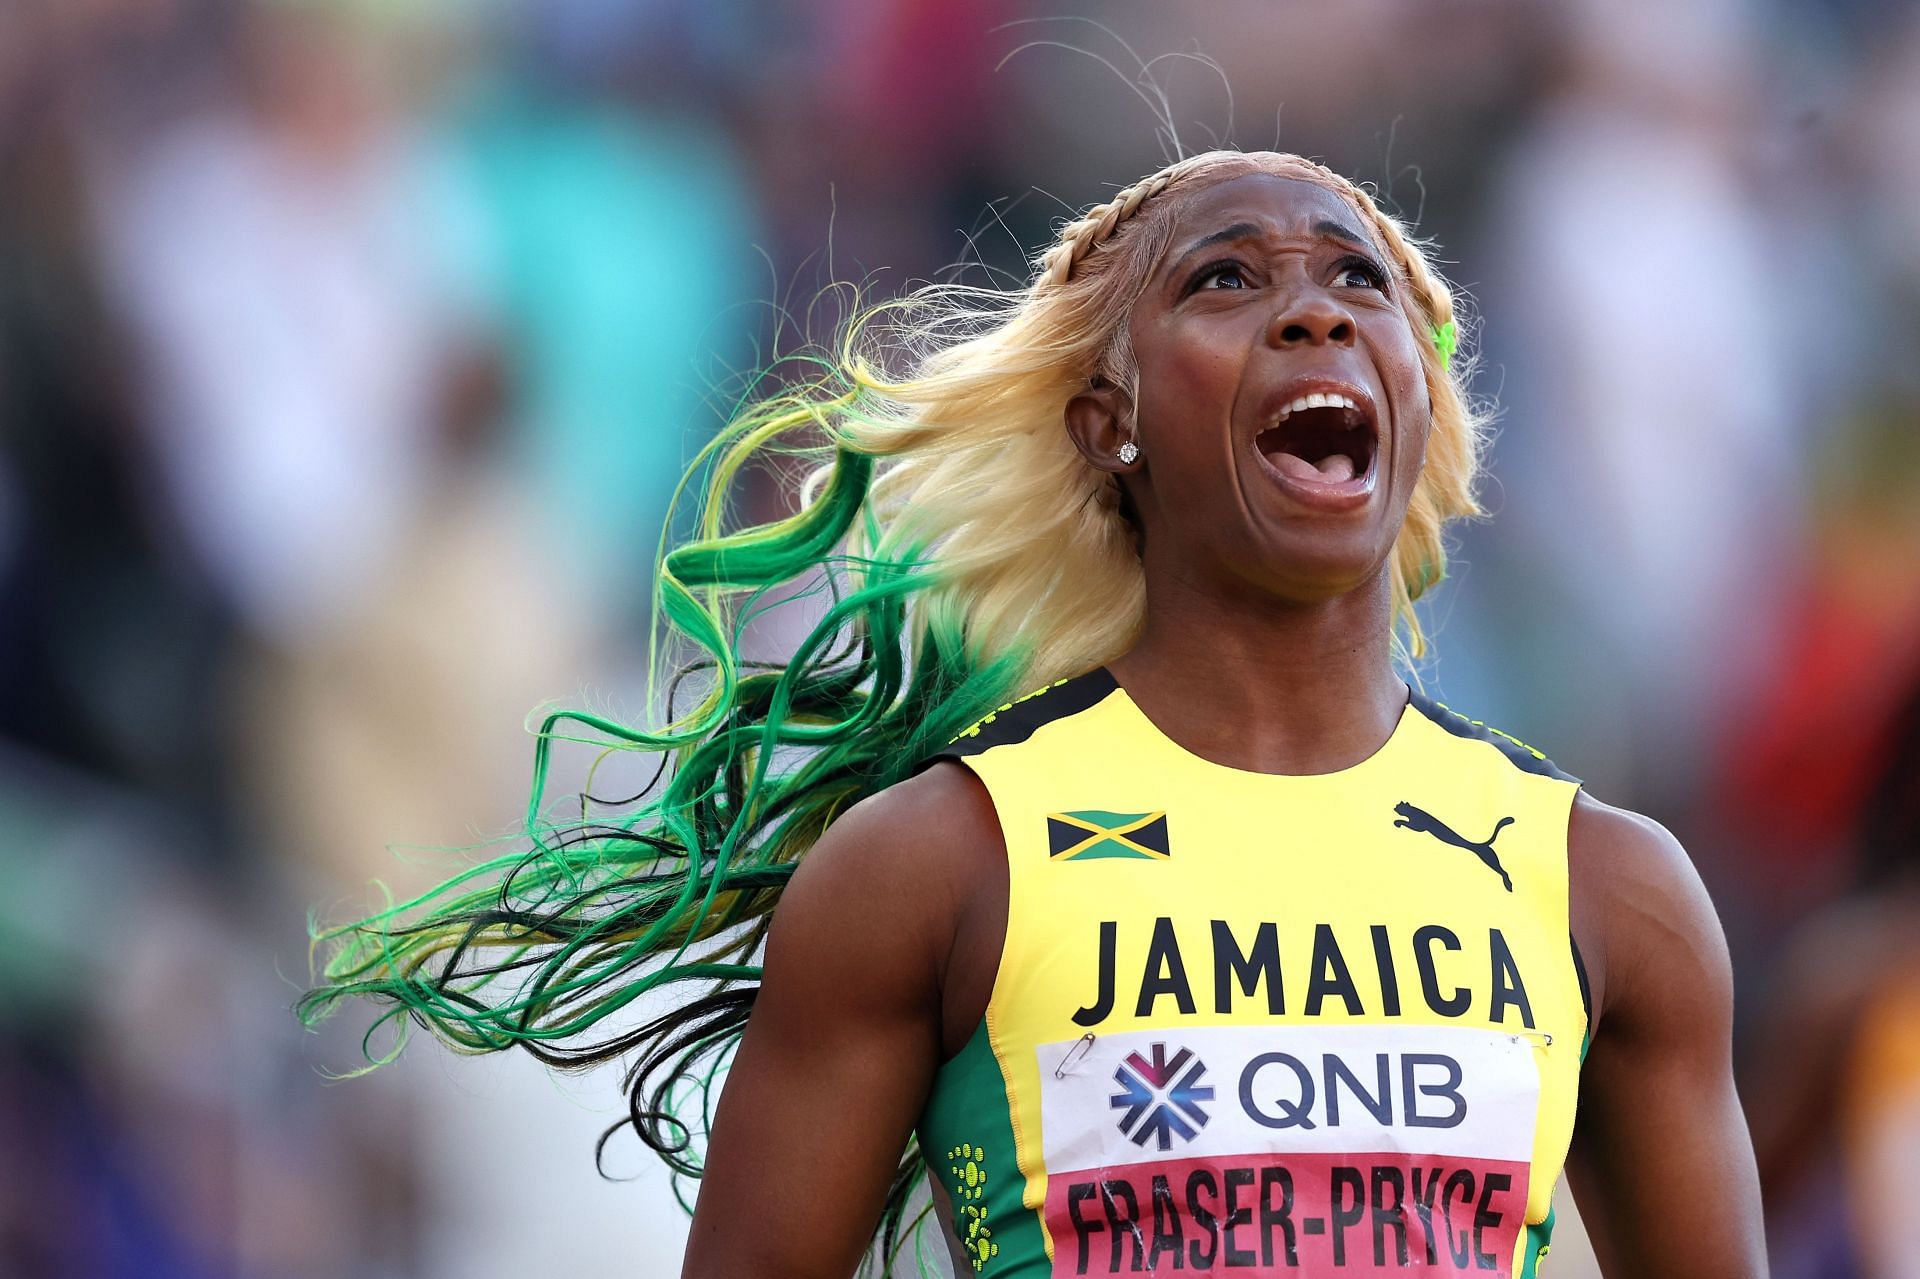 Shelly-Ann Fraser-Pryce of Team Jamaica celebrates after winning gold at the World Athletics Championships in Oregon. (Photo by Patrick Smith/Getty Images)